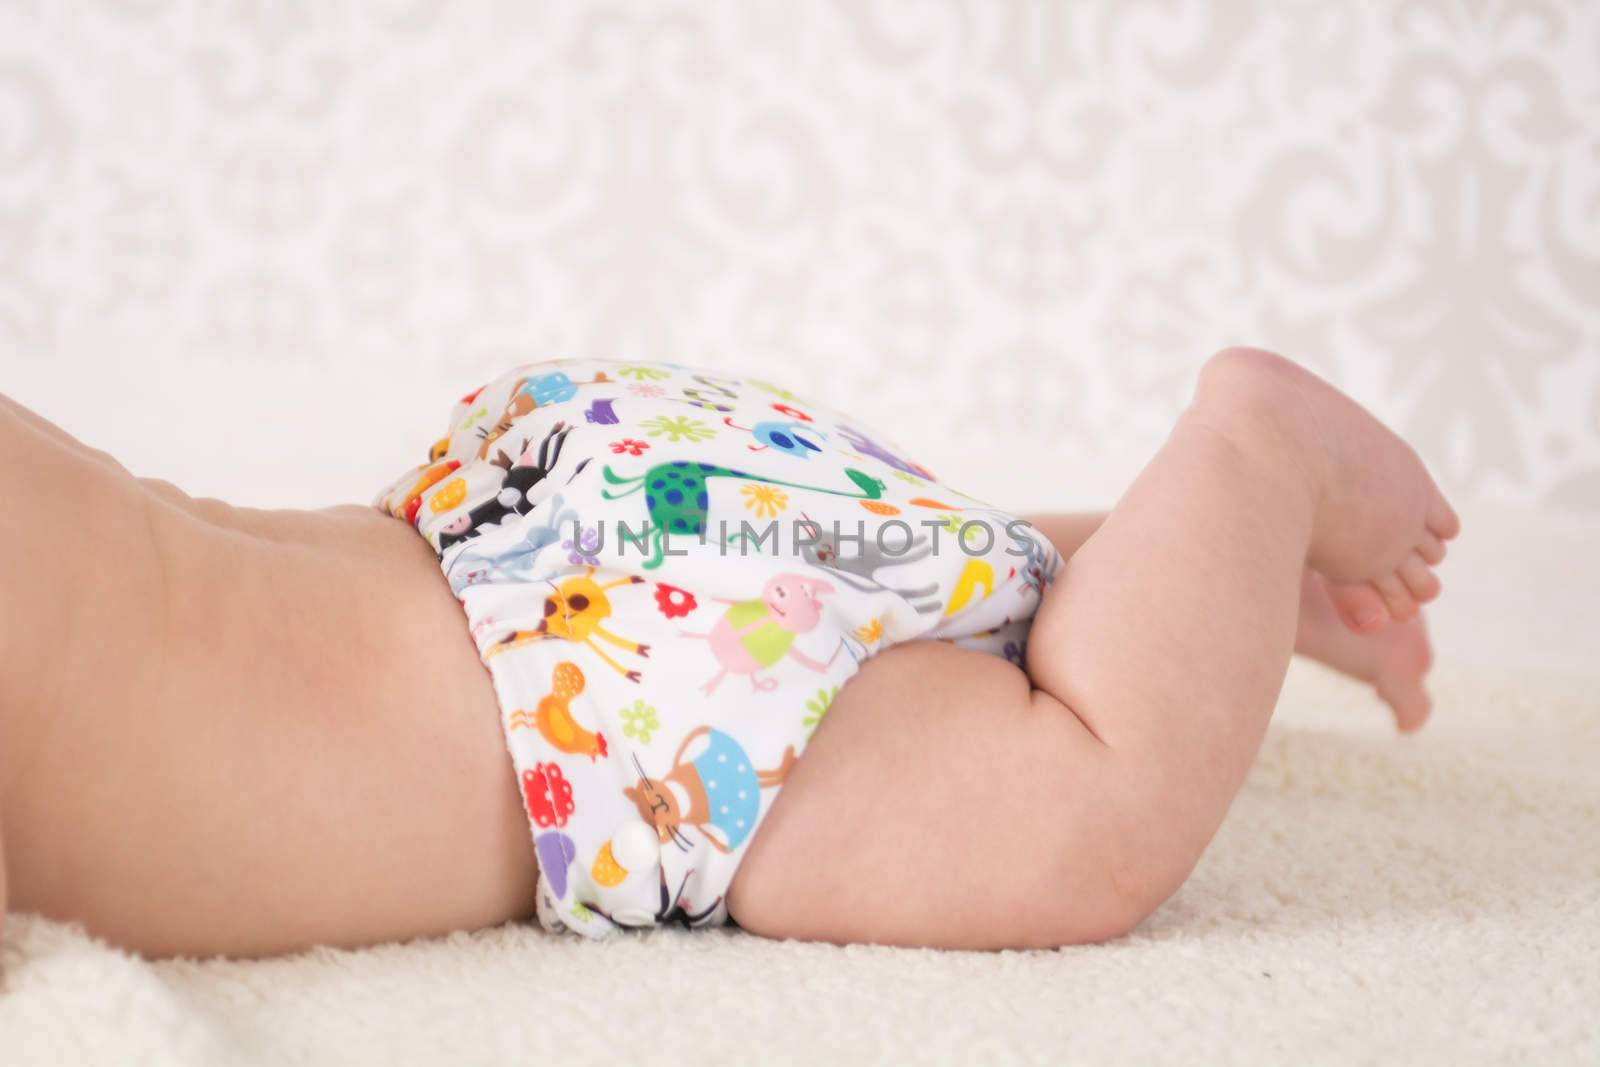 Close-up on a reusable white nappy with colorful animals pattern